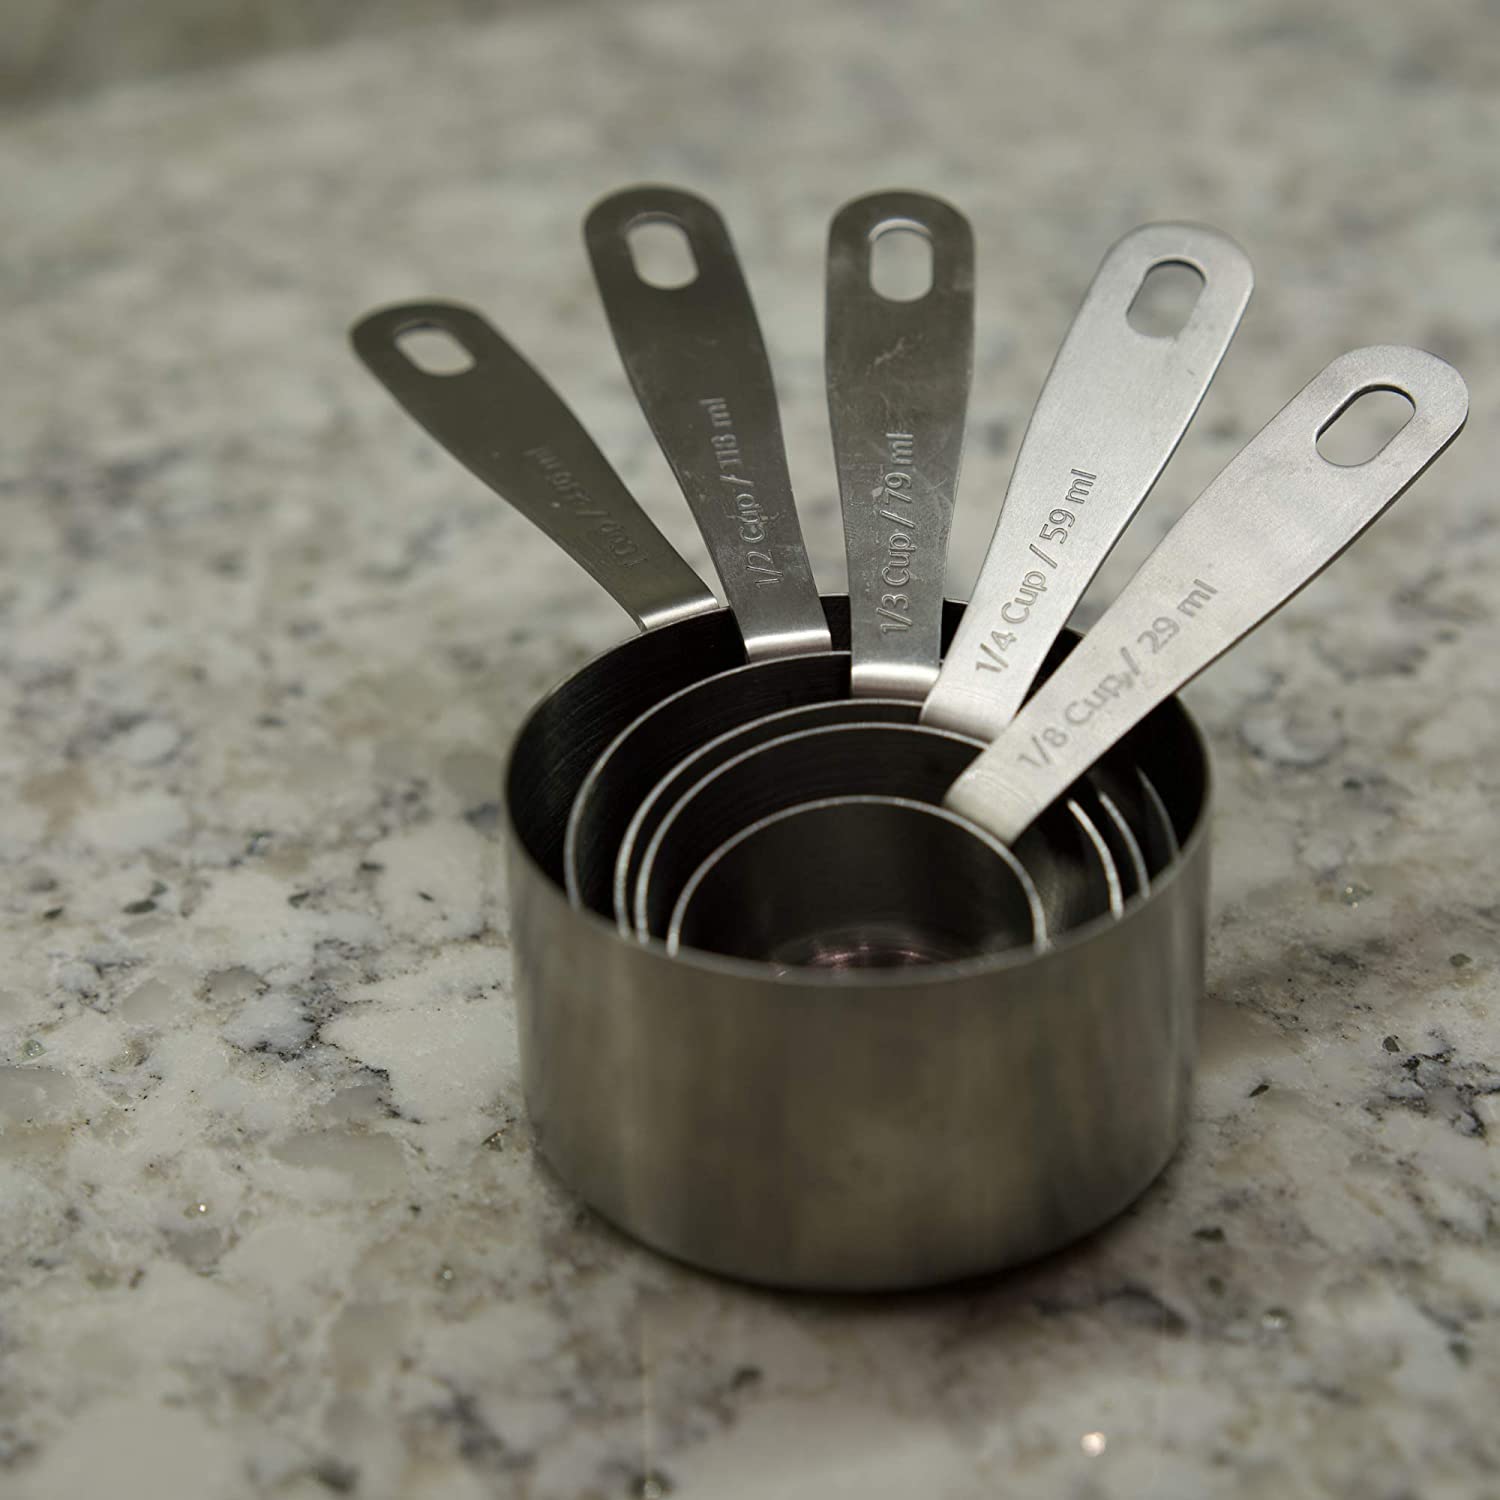 Stainless Measuring Cups Set - Whisk